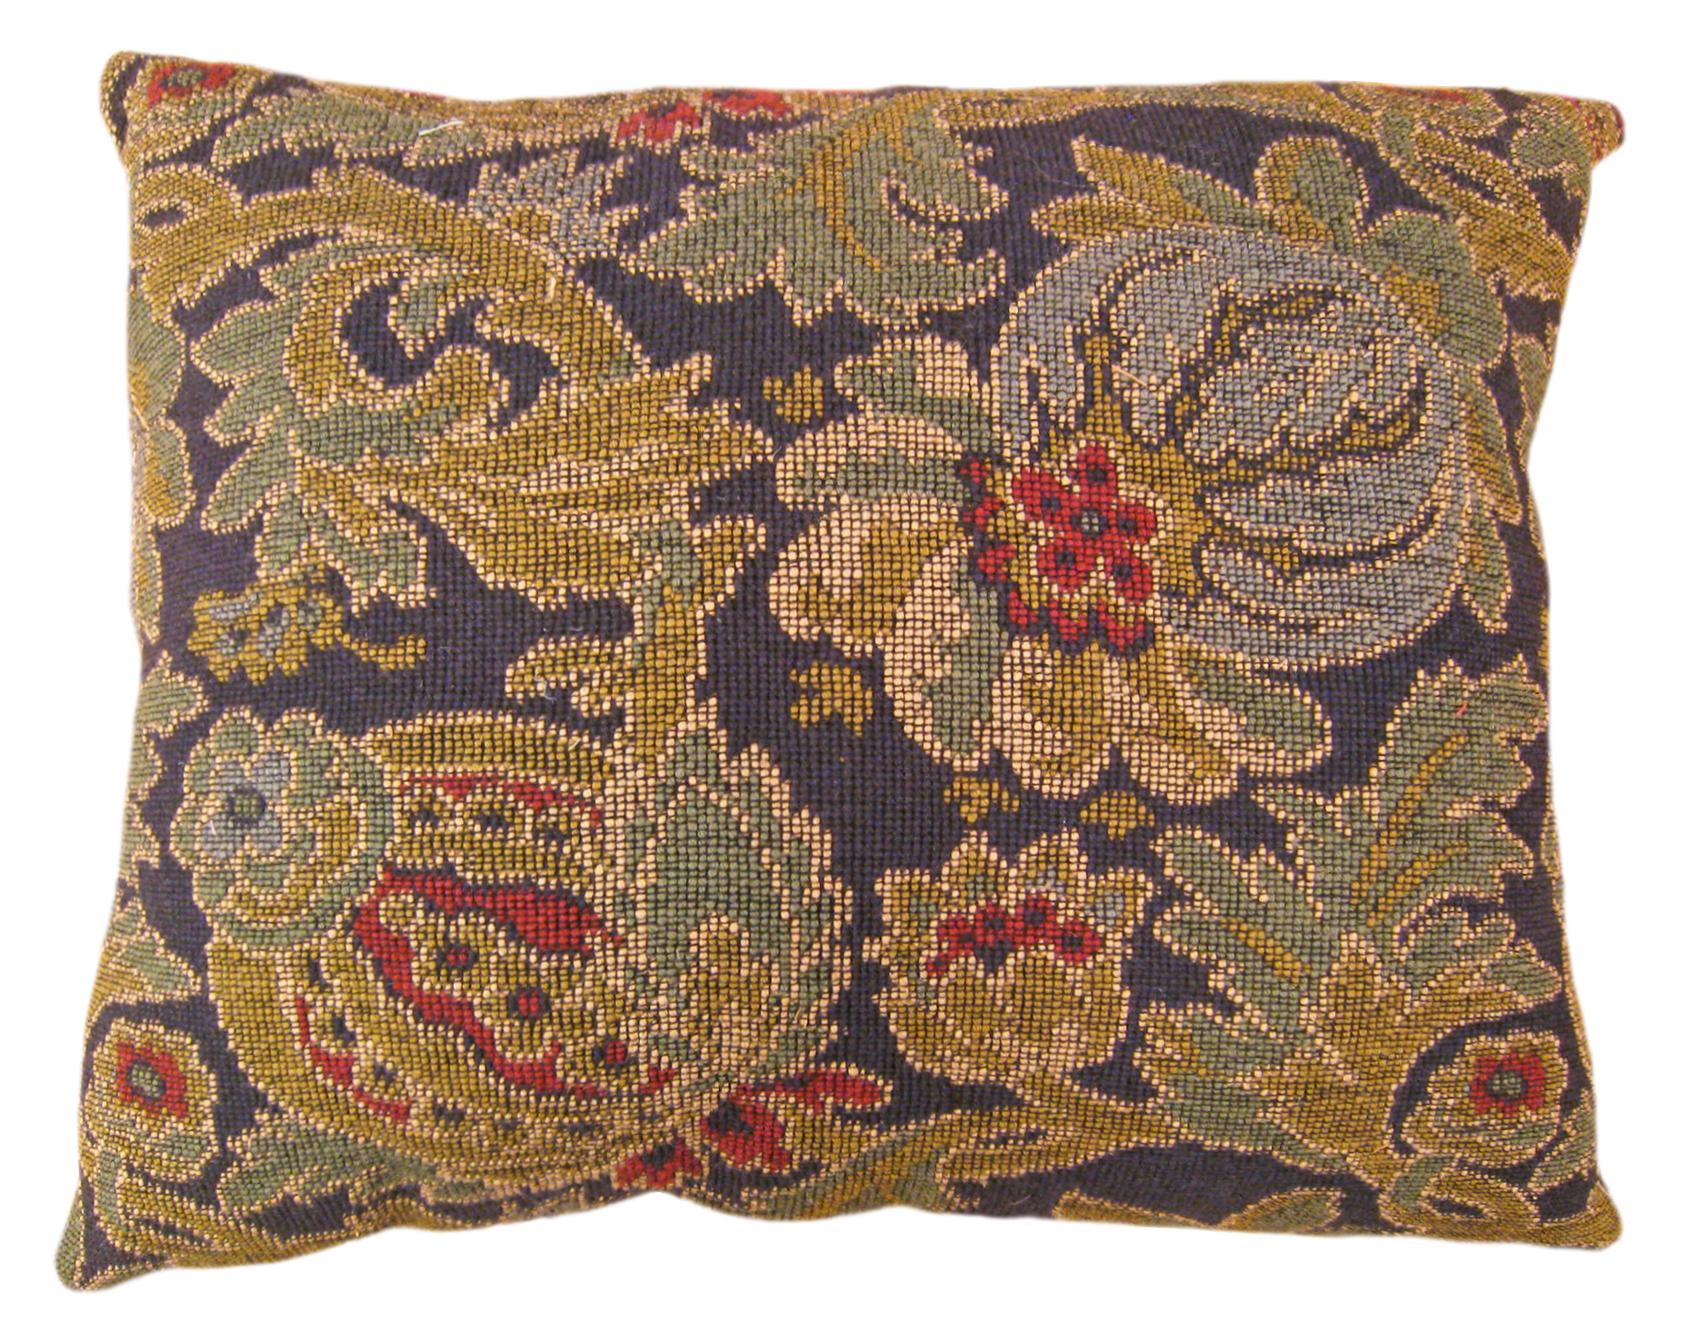 Pair of Decorative Antique Jacquard Tapestry Pillows with Floral Elements For Sale 2